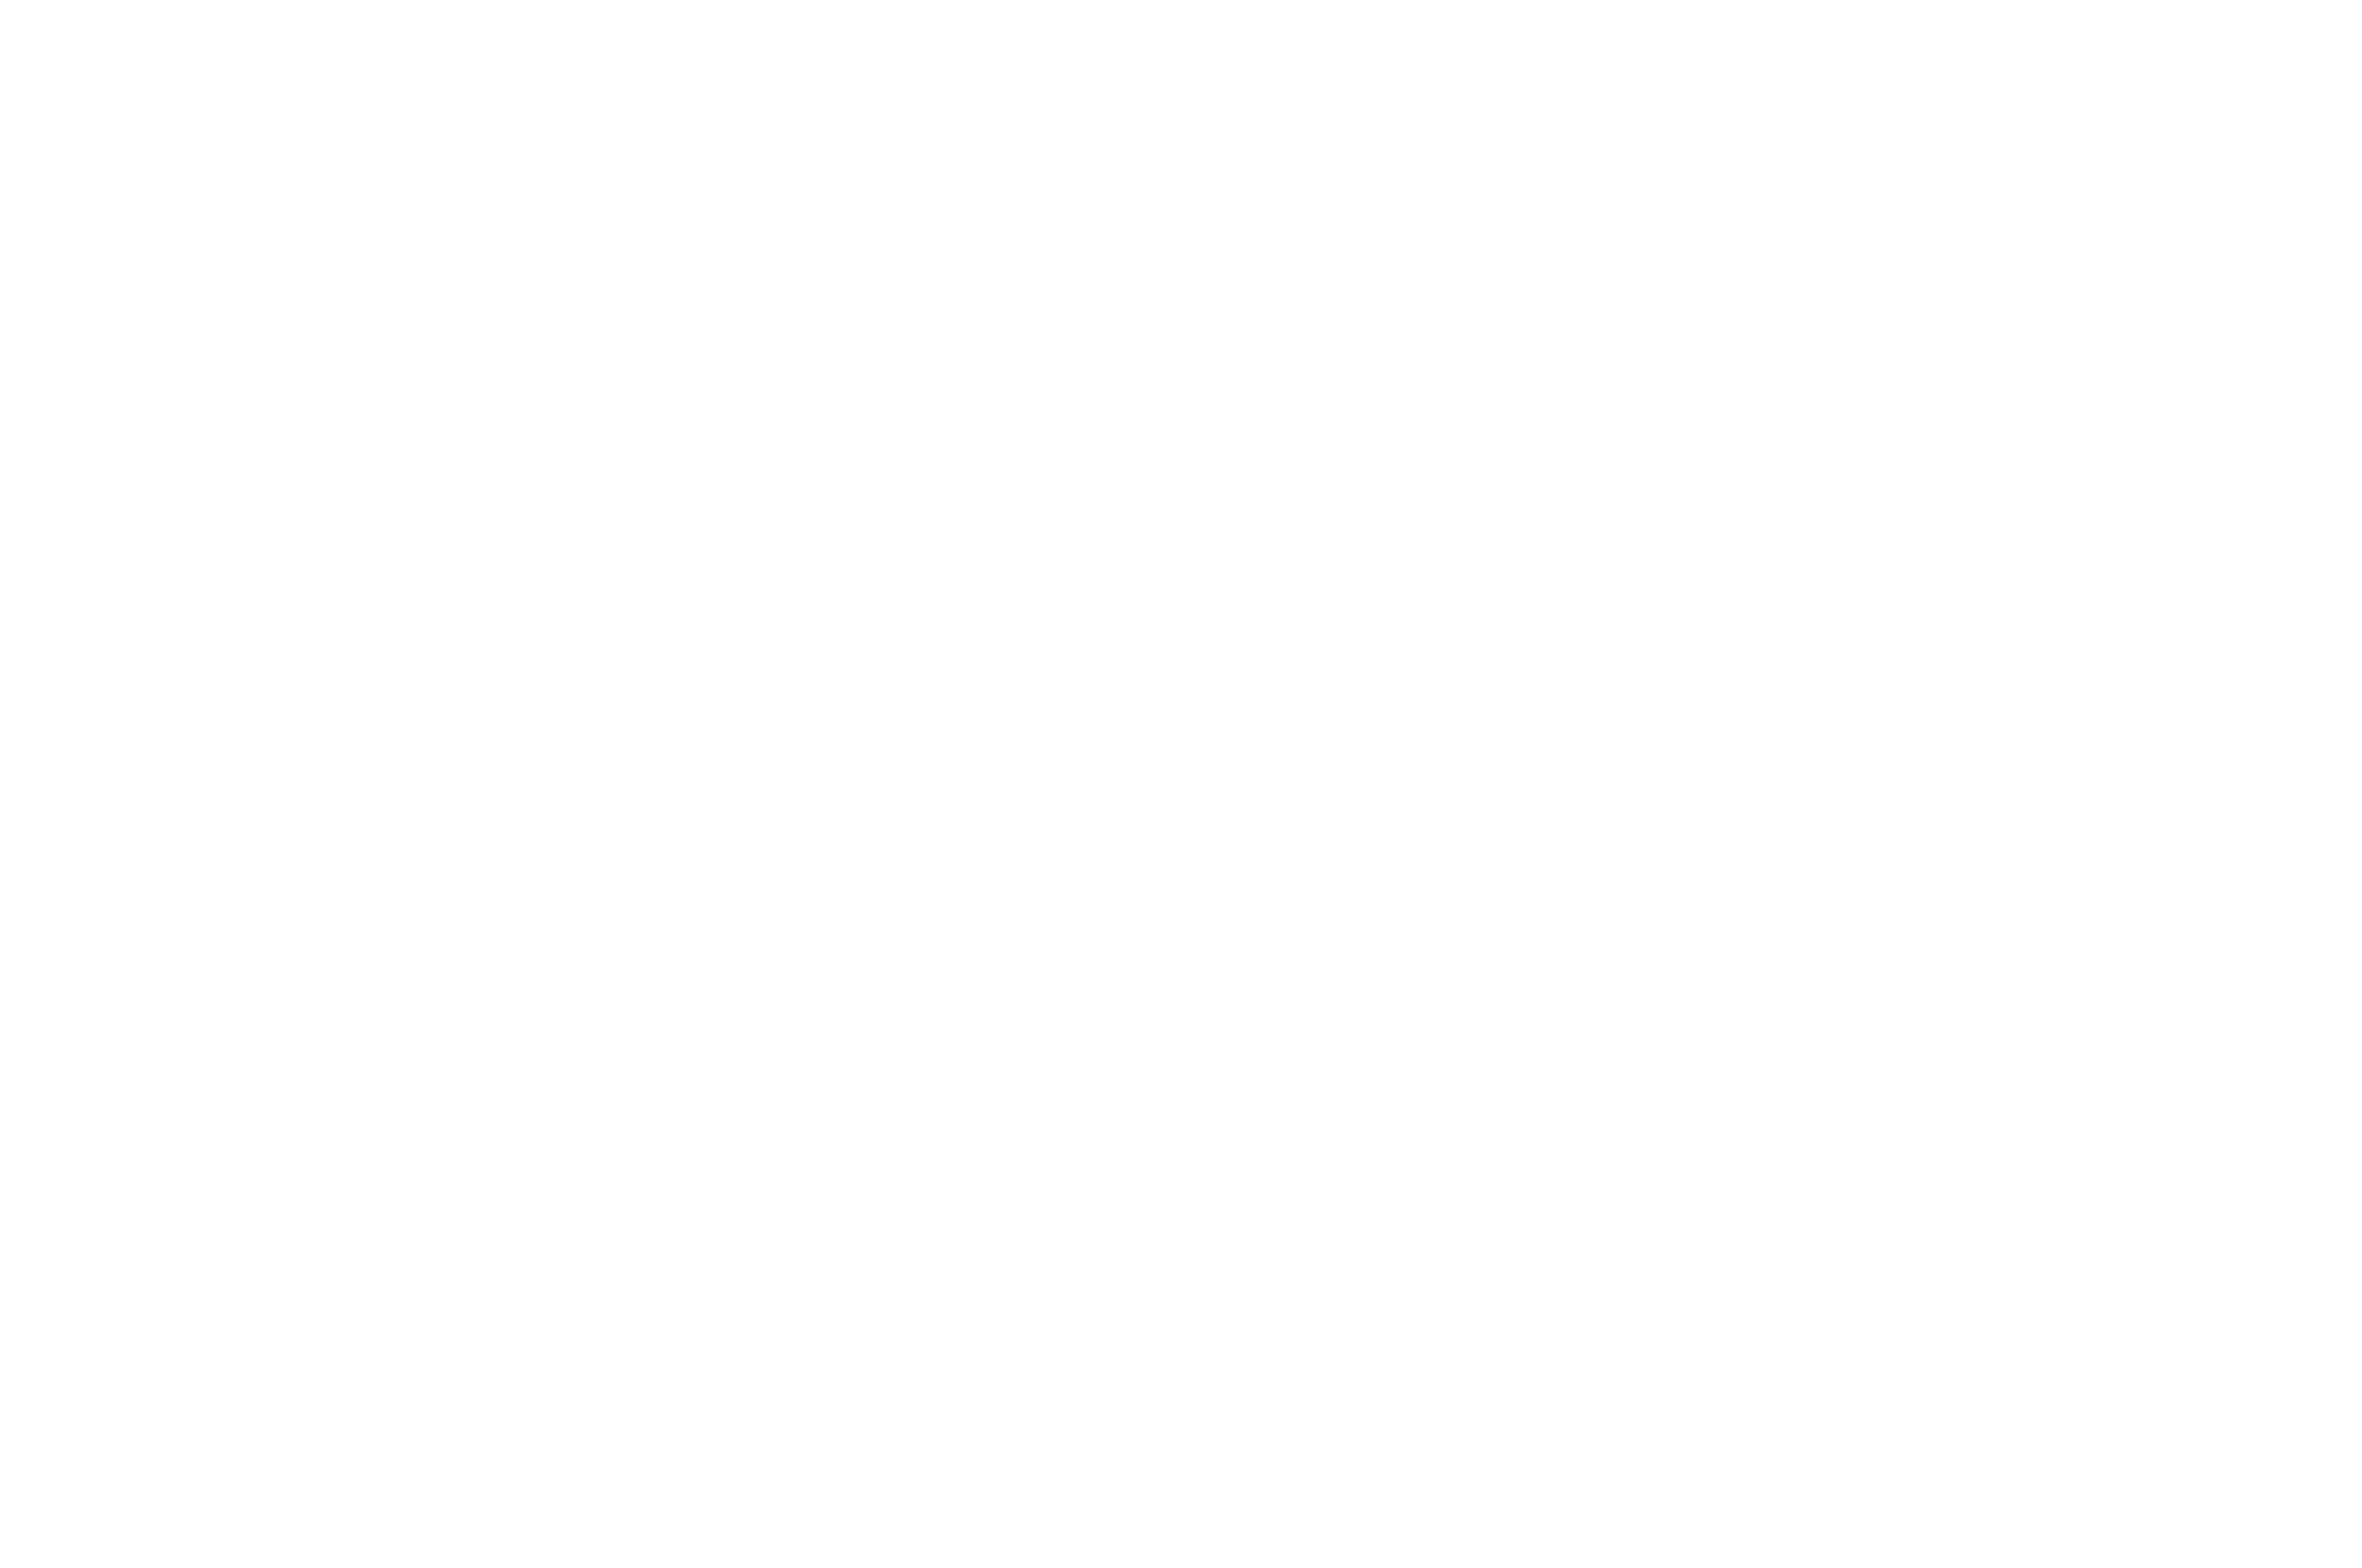 OFFICIALSELECTION-AustraliaIndependentFilmFestival-2020_1.png